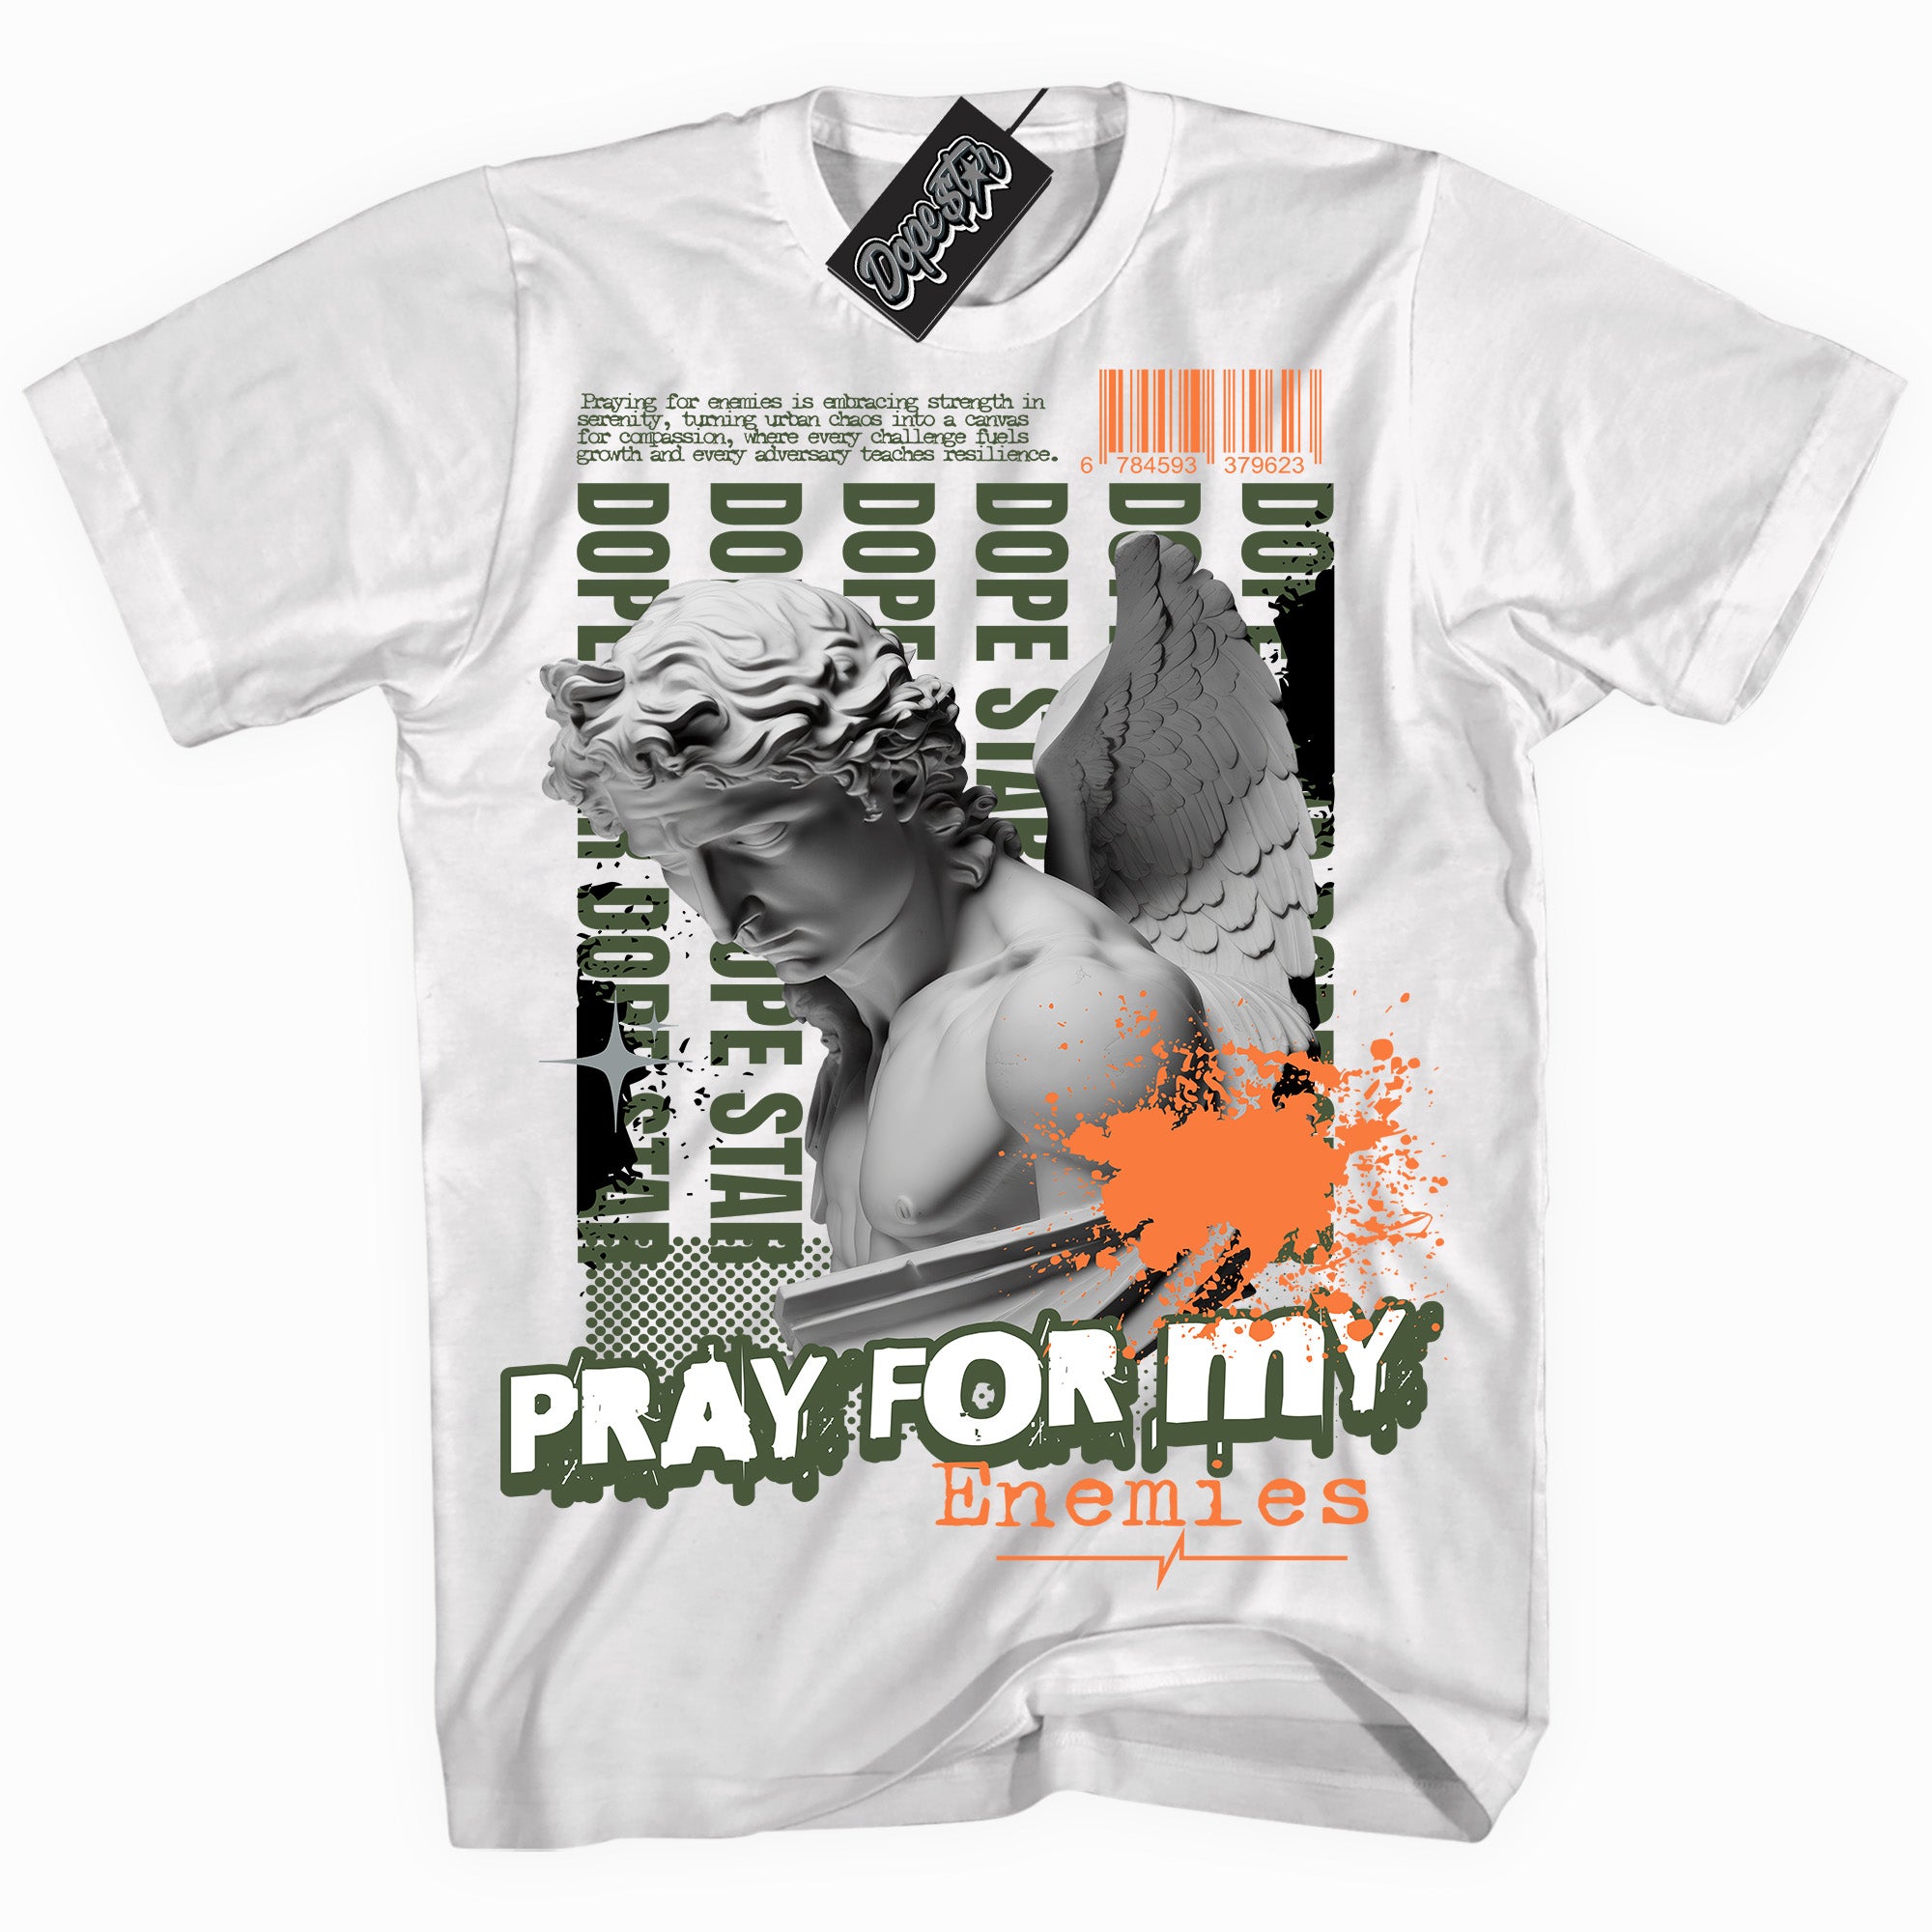 Cool White graphic tee with “ Pray Enemies ” print, that perfectly matches Olive 5s sneakers